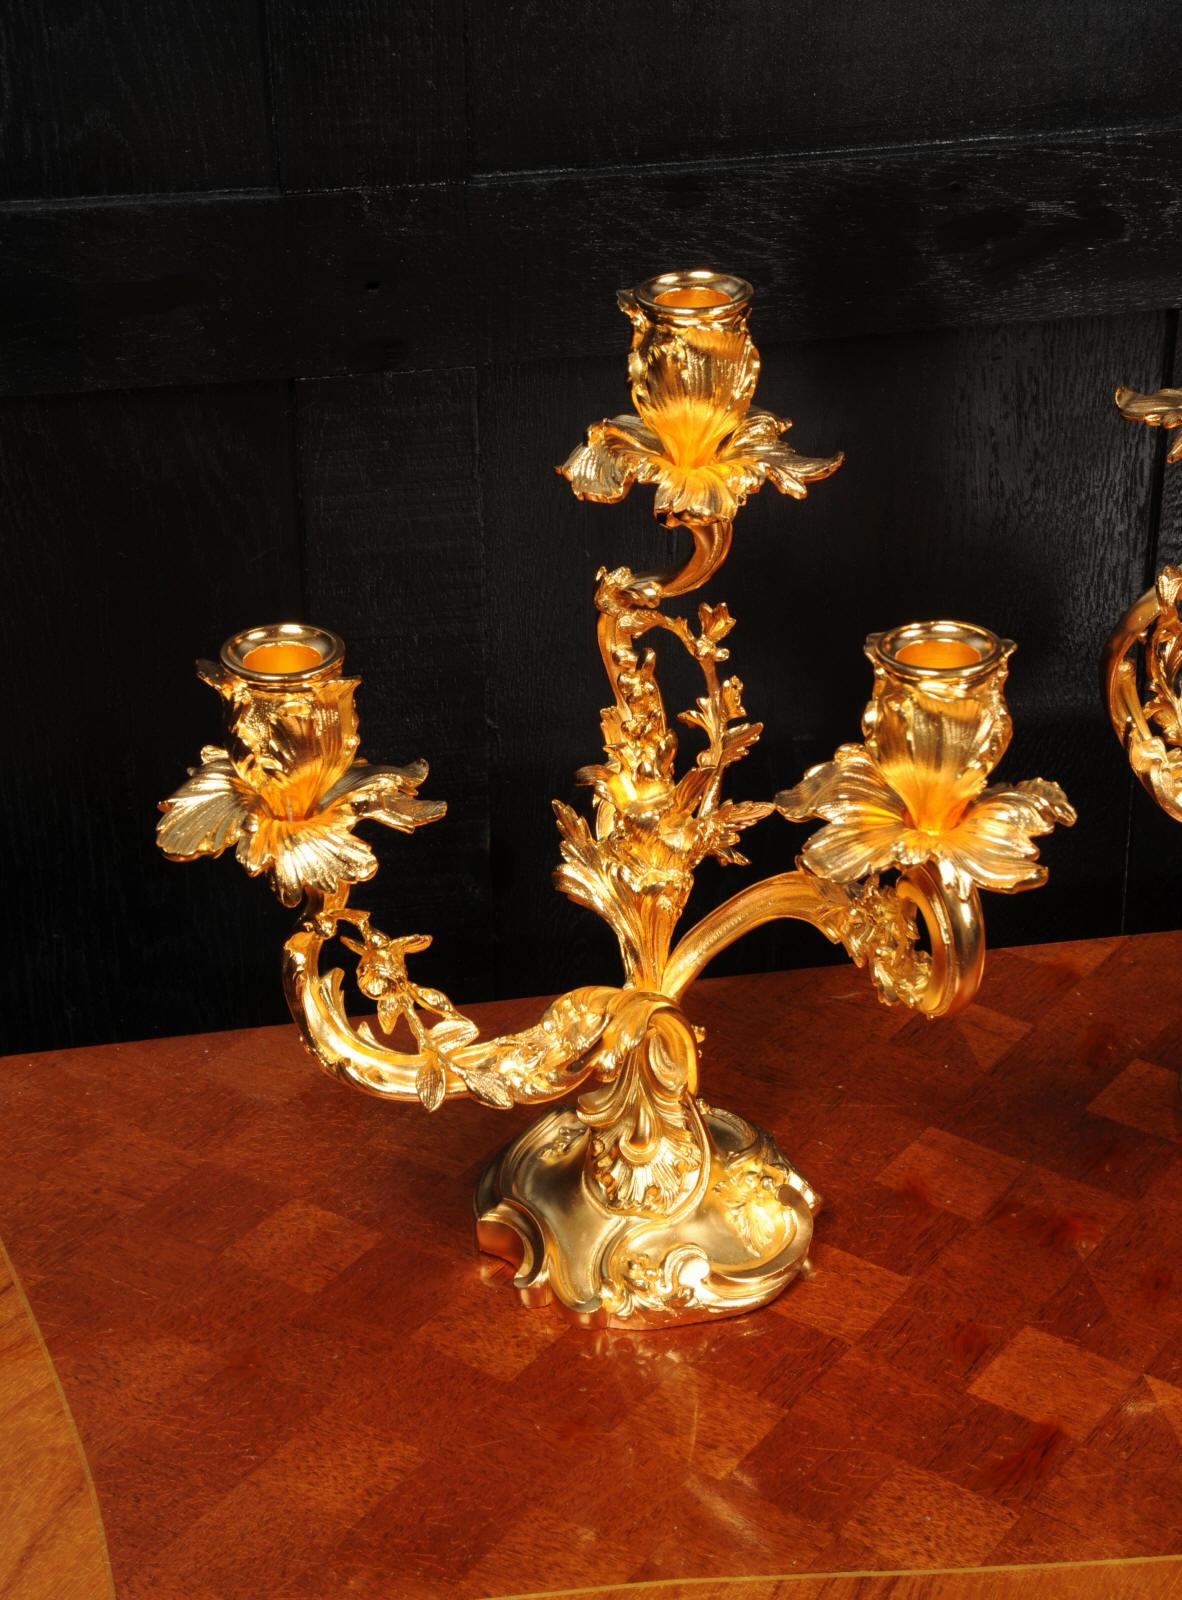 A magnificent pair of antique French candelabra in the manner of Juste Aurele Meissonier (Italian, 1695-1750). Beautifully formed as acanthus wrapped stems, with swirling acanthus arms and fluted tulip-form nozzles. The design is beautifully bold,